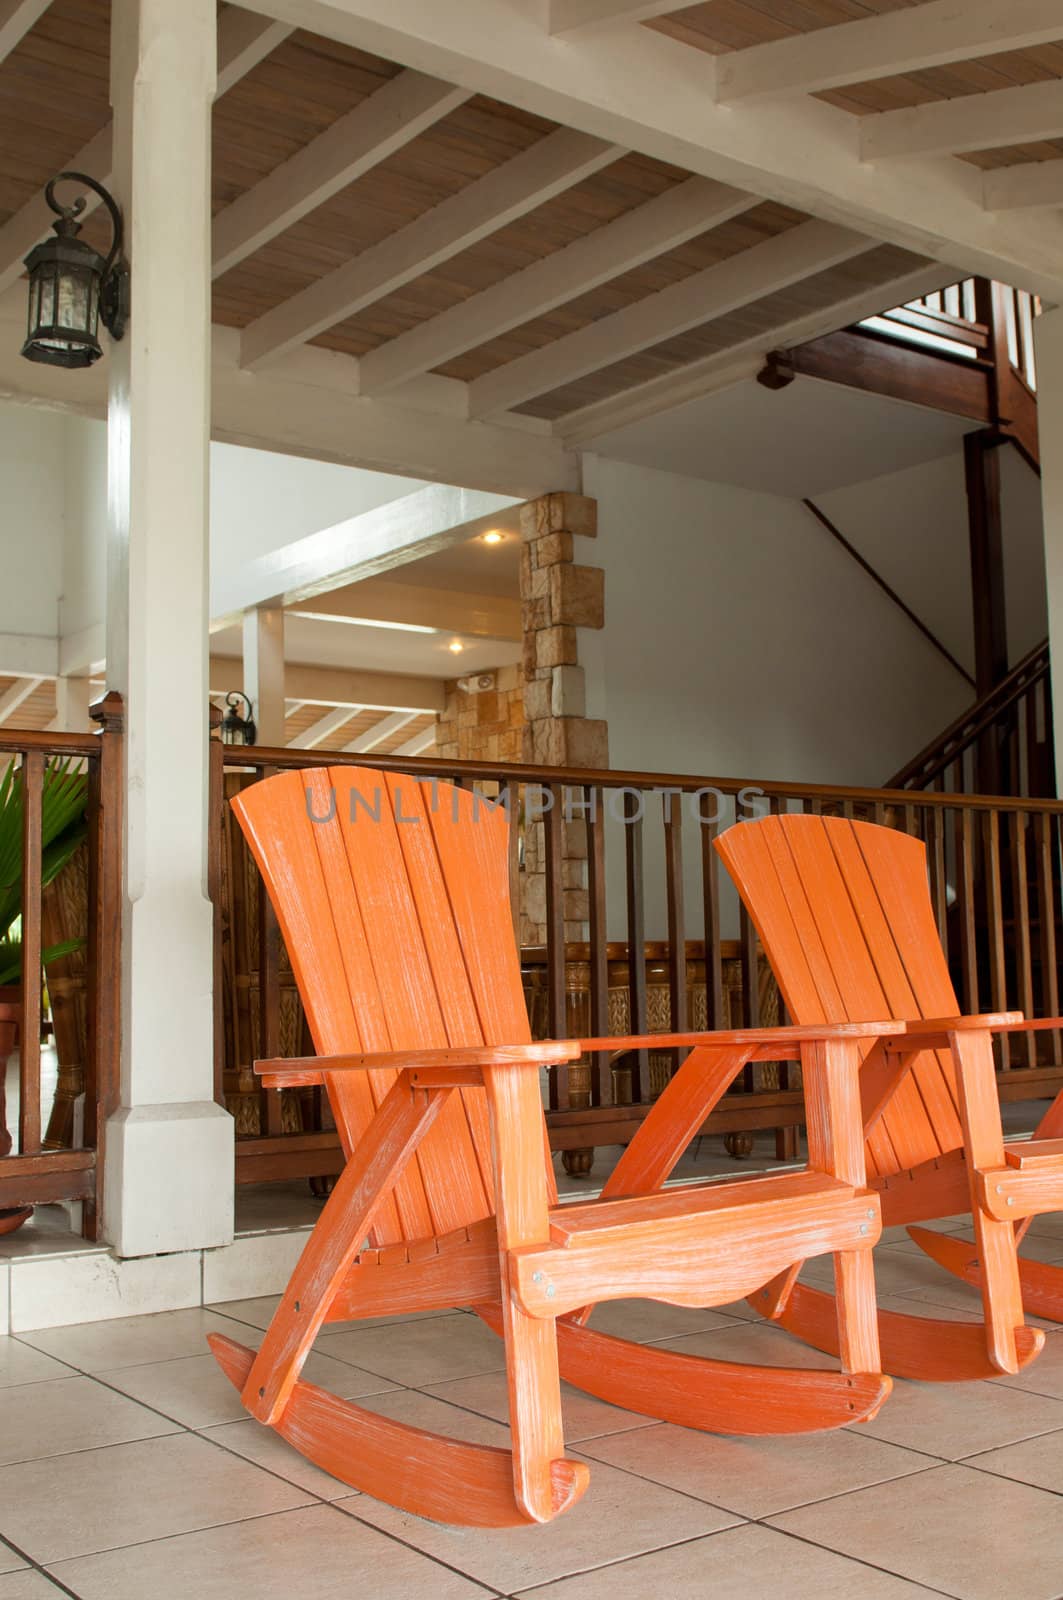 orange wooden rocking chairs on a porch (usual setting on a tropical resort)